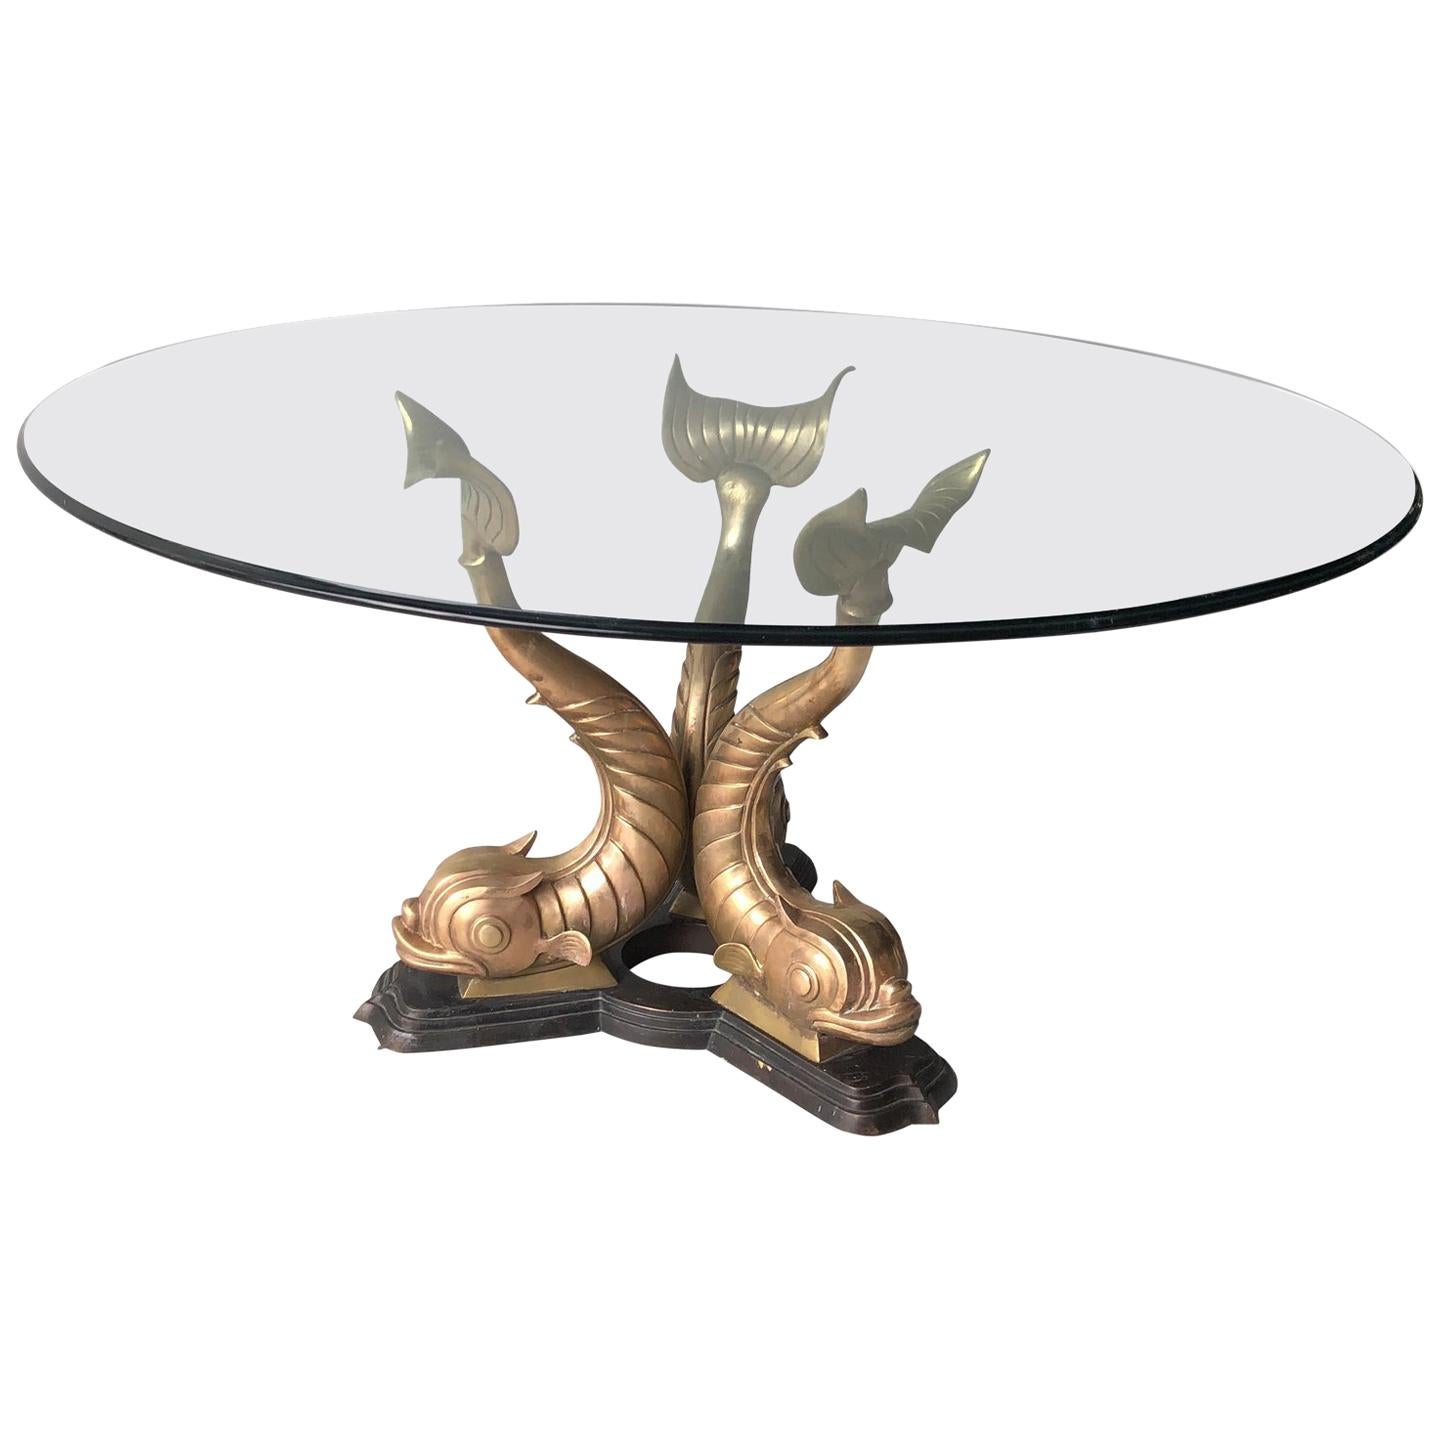 1960s Italian Brass Koi Fish Dining or Entry Table Base